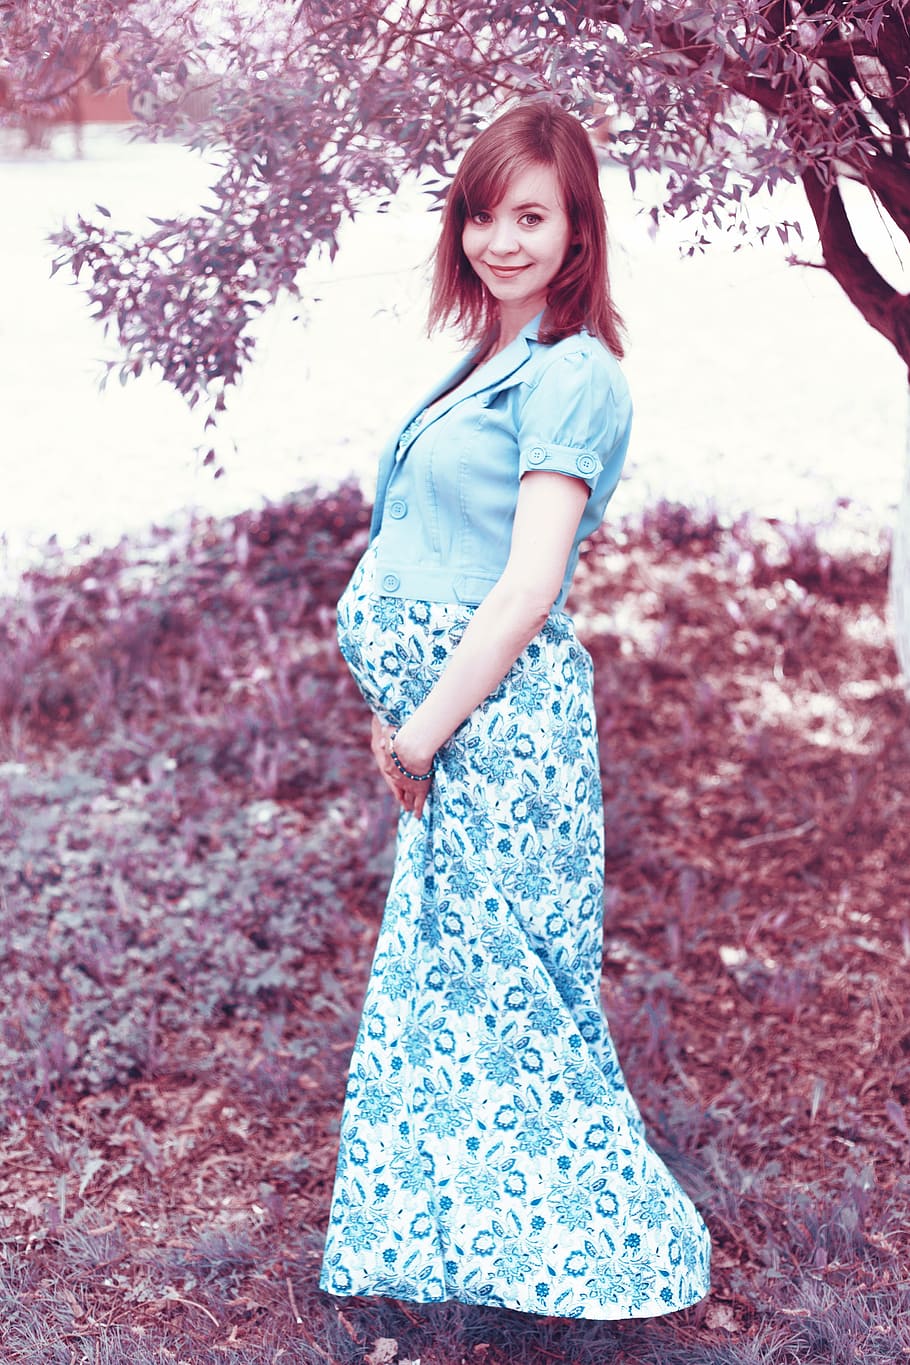 pregnant woman wearing blue floral dress standing near tree during daytime, HD wallpaper